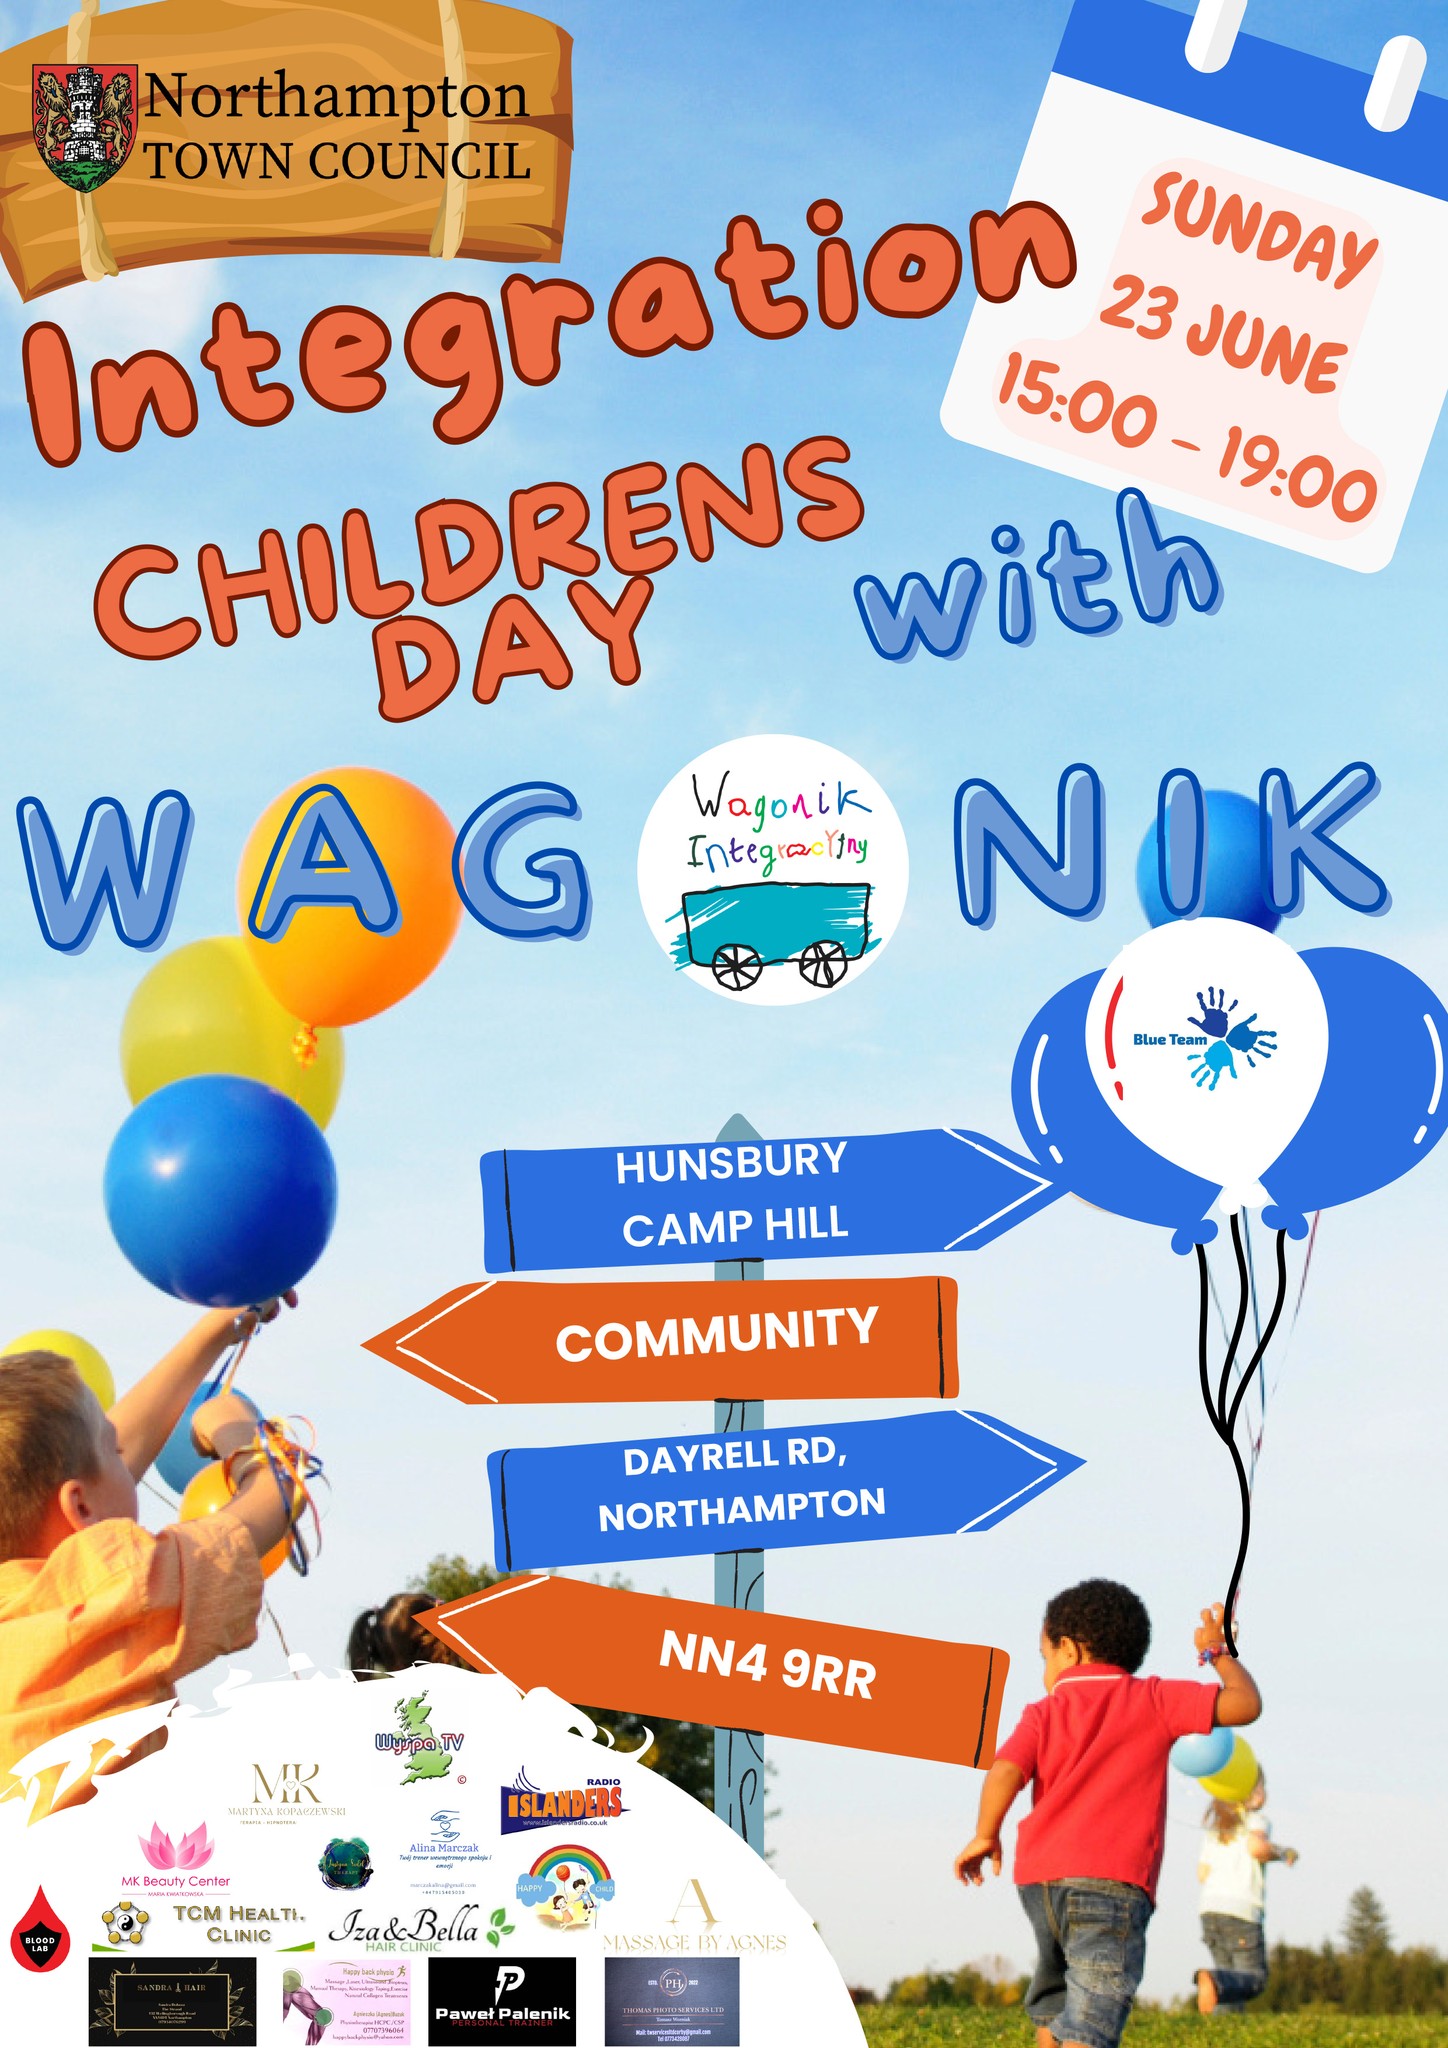 Integration Children's Day with a Wagonik